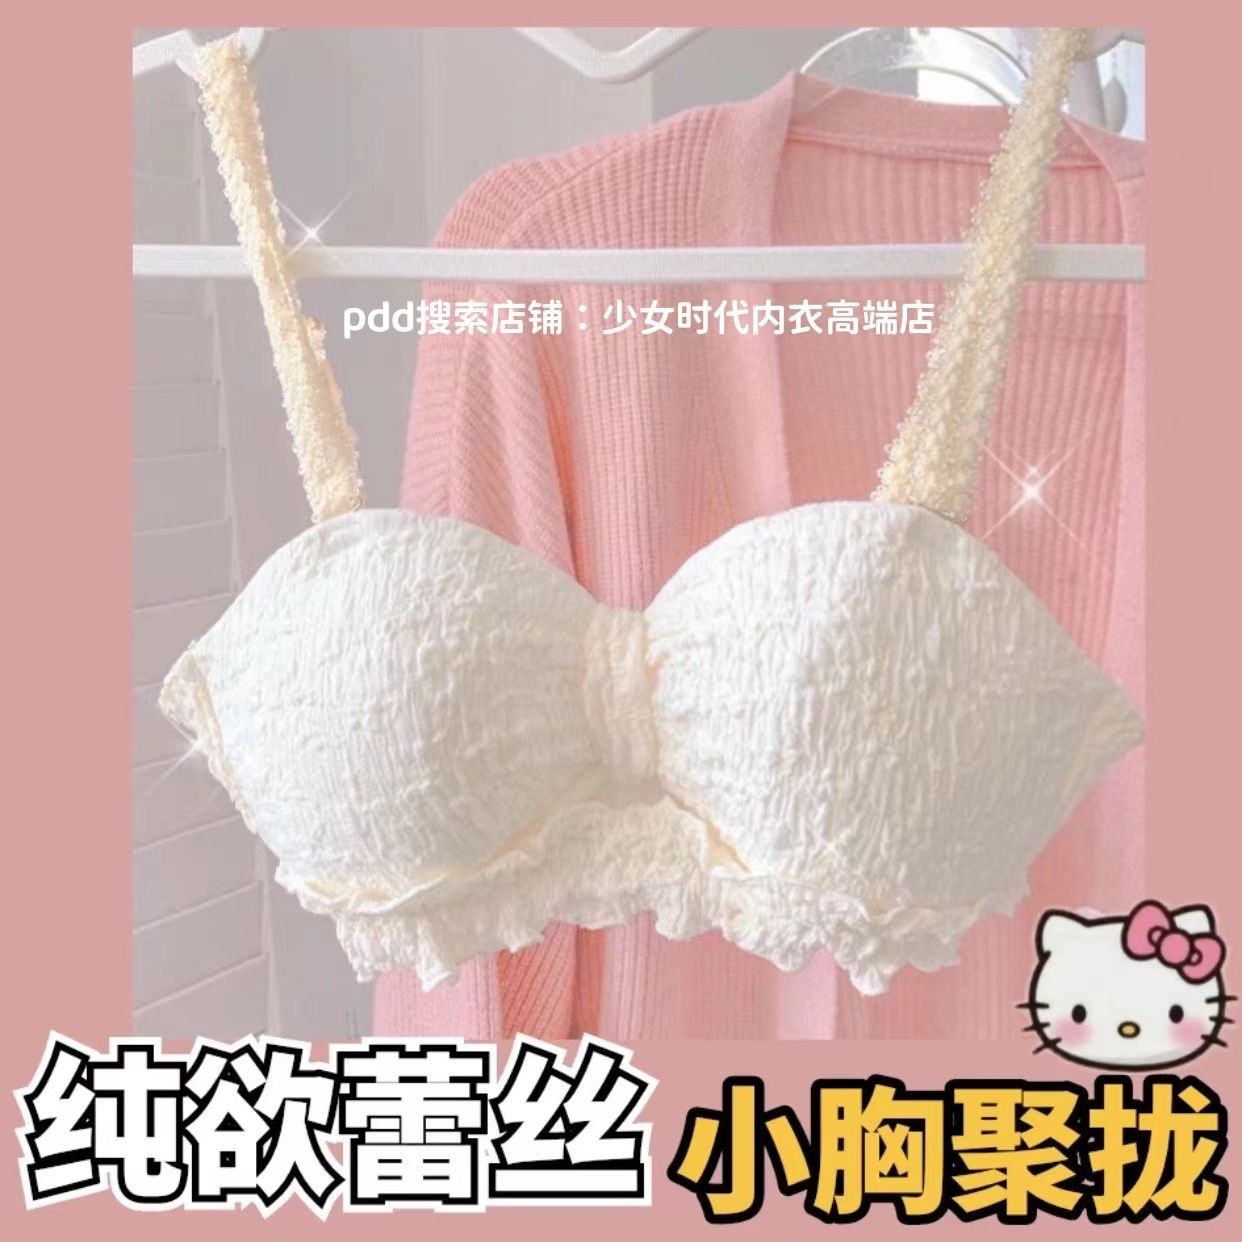 Pure desire style French underwear small chest girl cute underwear suit students comfortable no steel ring anti-sagging not empty cup